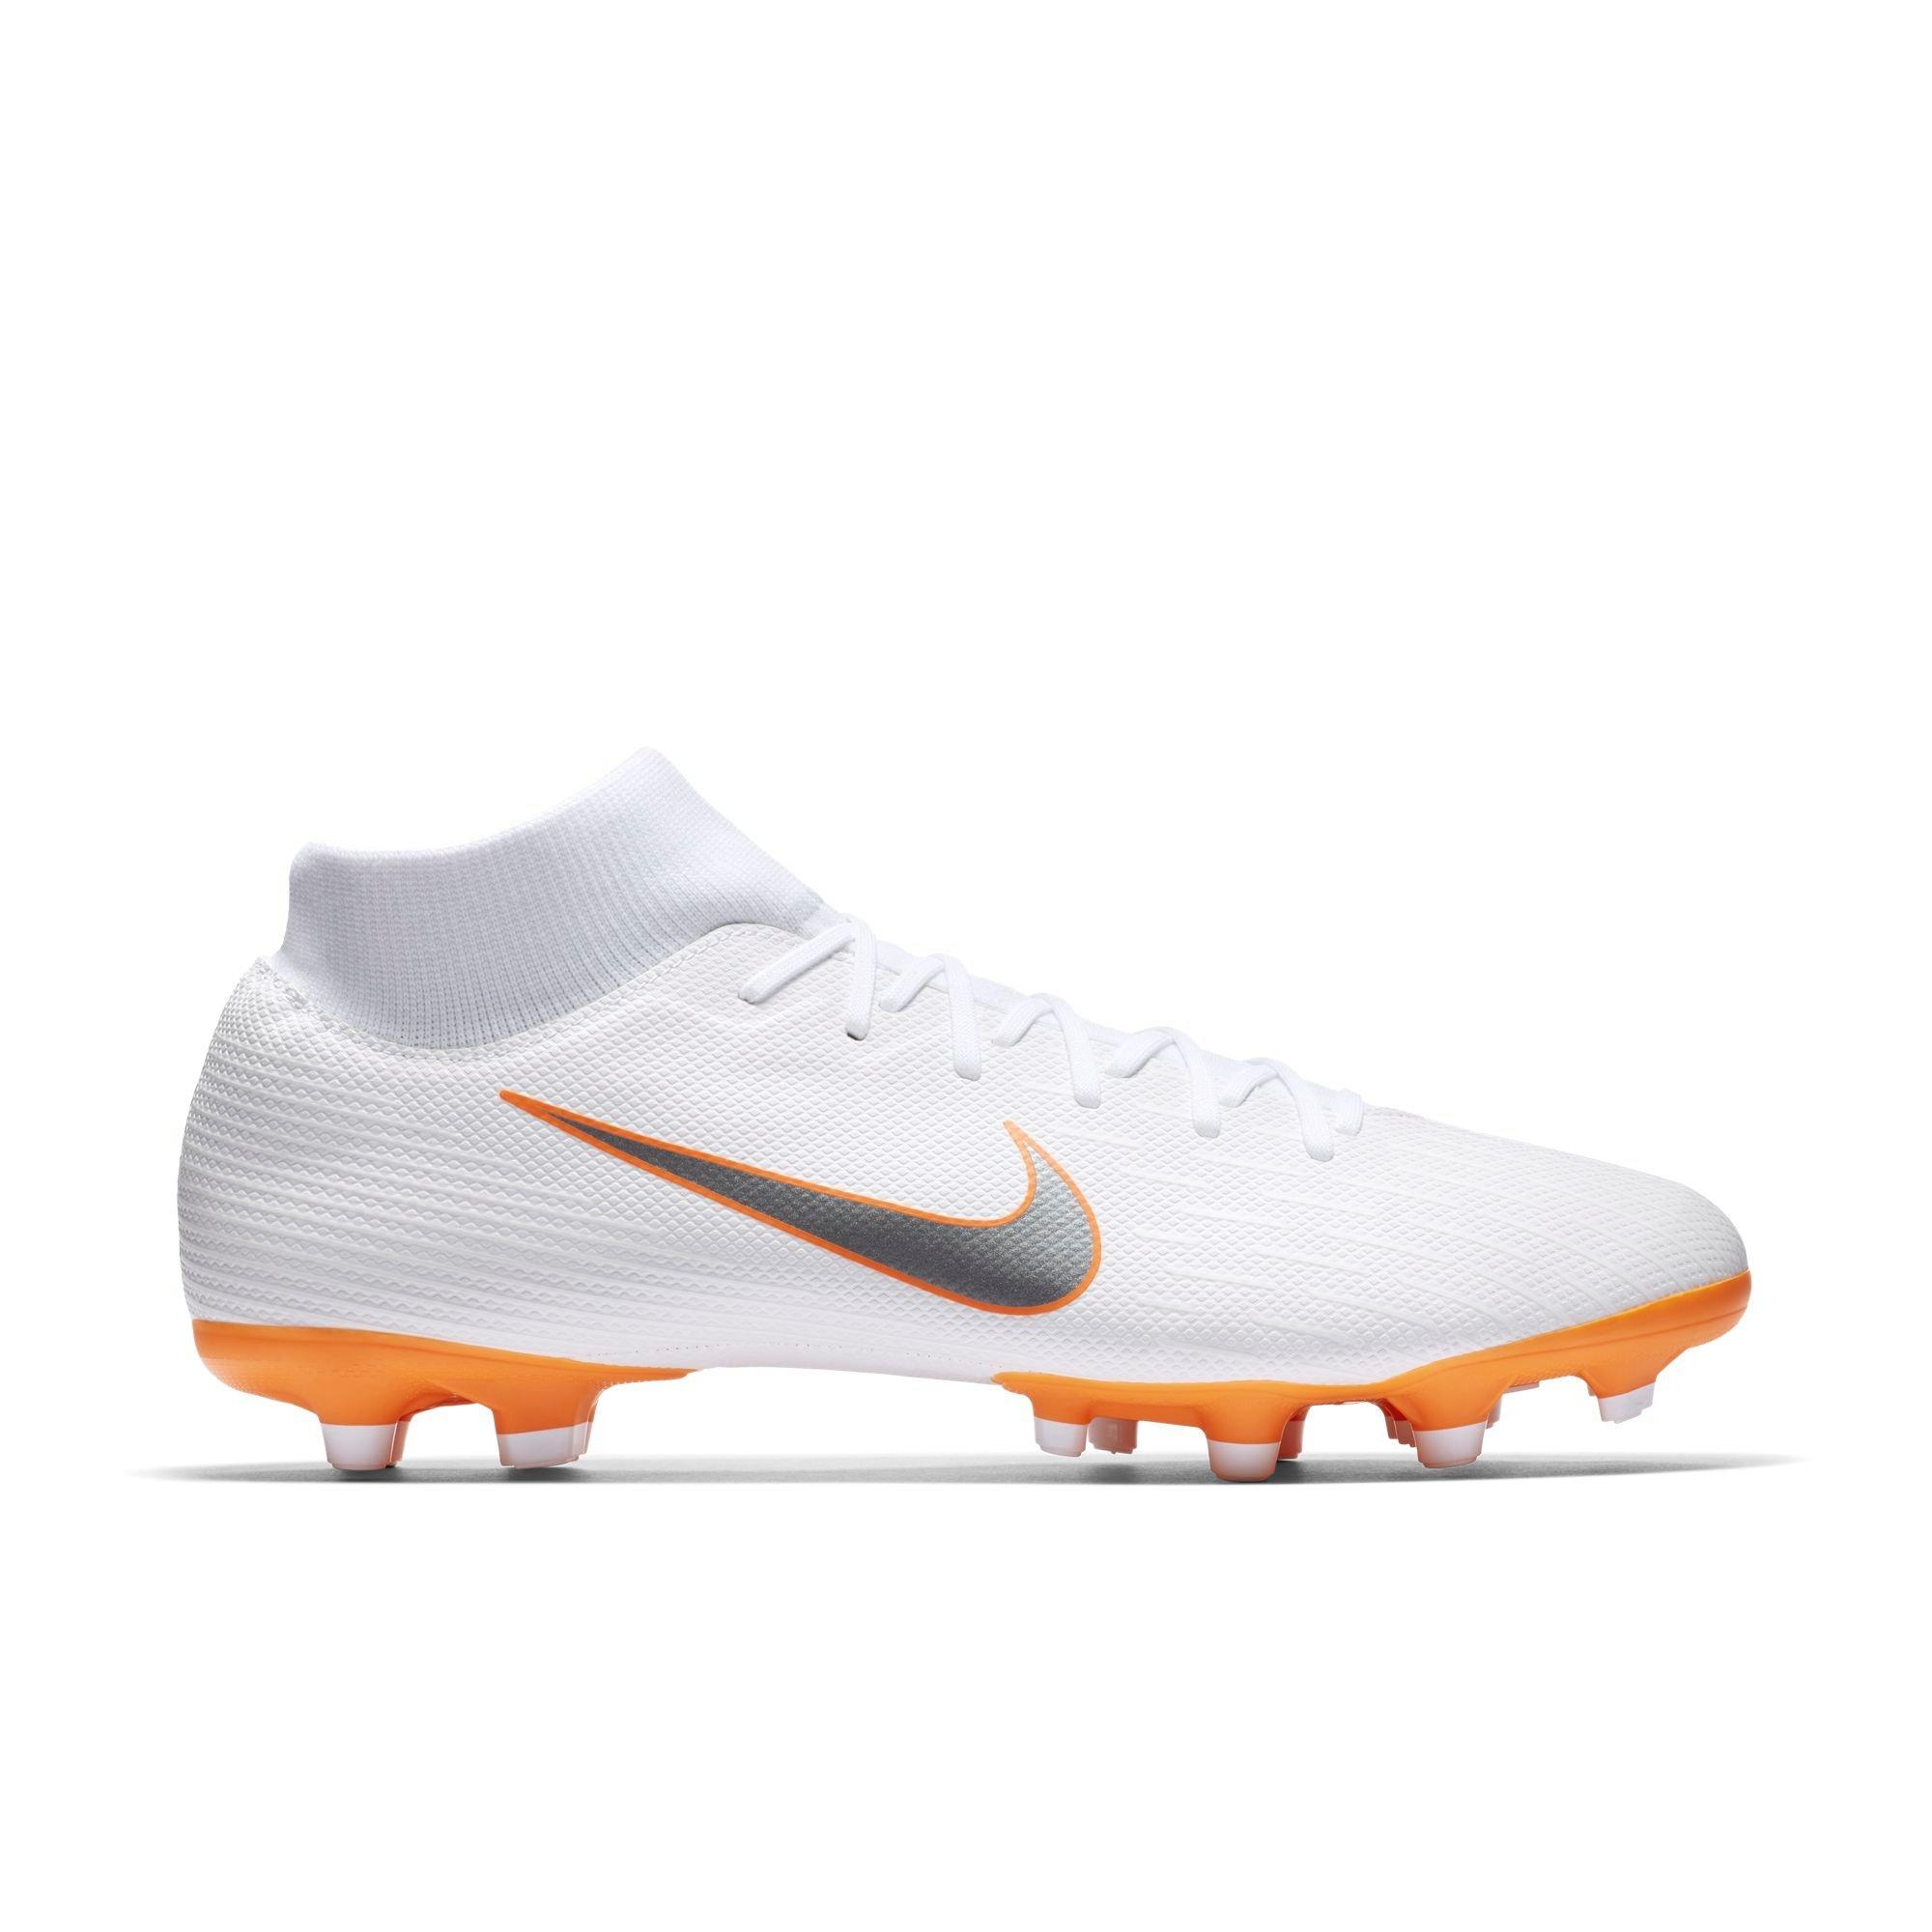 7 Reasons to NOT to Buy Nike CR7 SuperflyX 6 Academy Turf.